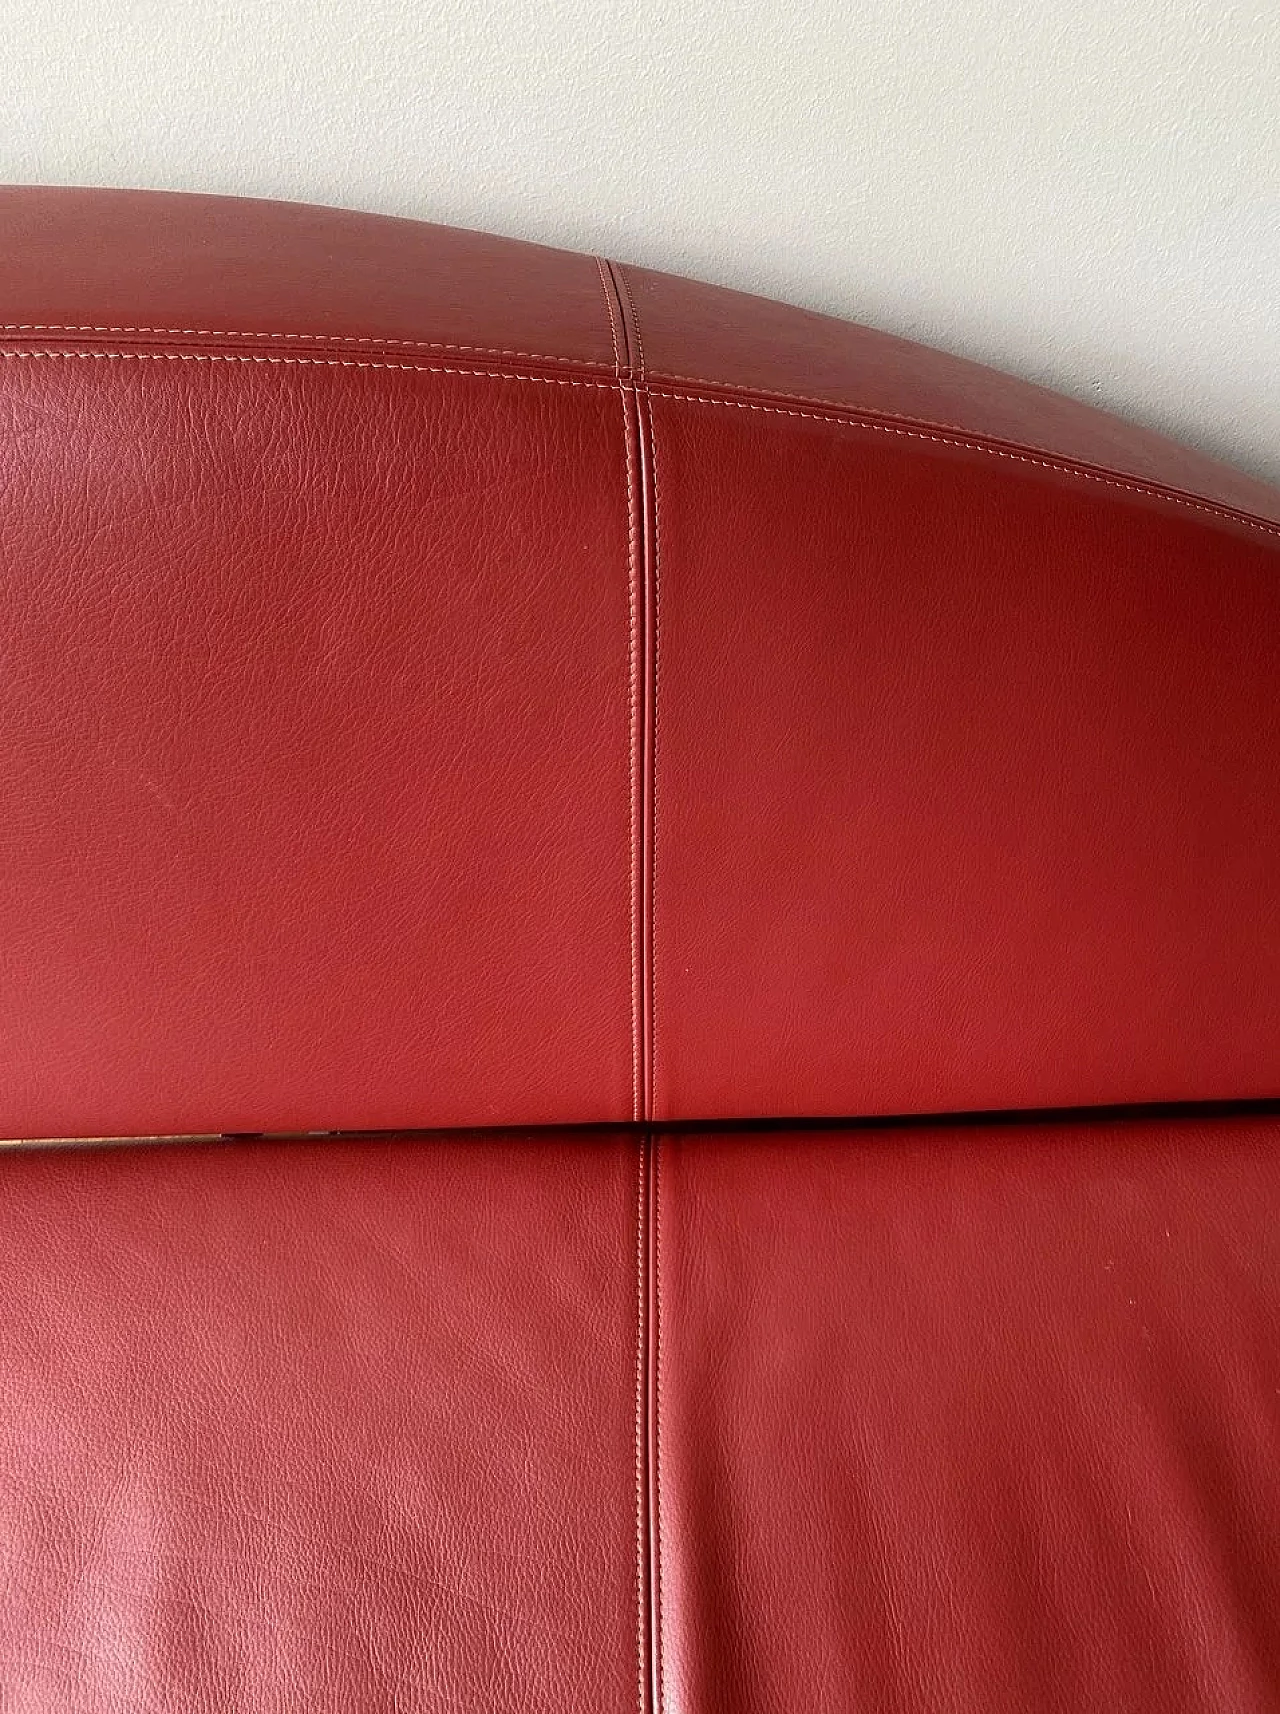 Aspen 180 sofa in red leather by J.M. Massaud for Cassina, 2005 6